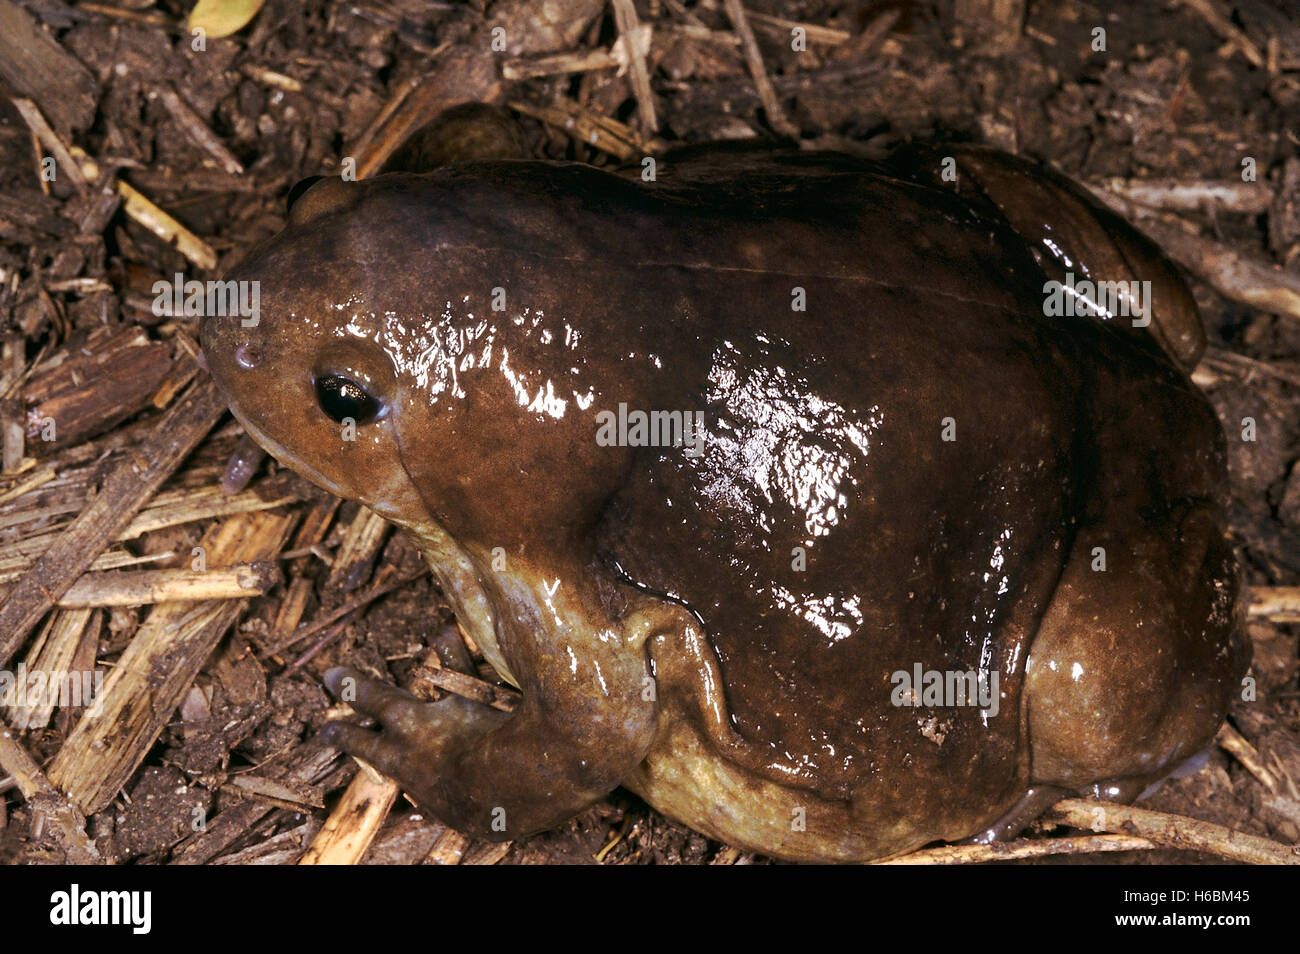 Uperodon Globosum. Indian Balloon frog.,A medium sized, stout bodied frog which inflates its body like a balloon when threatened Stock Photo